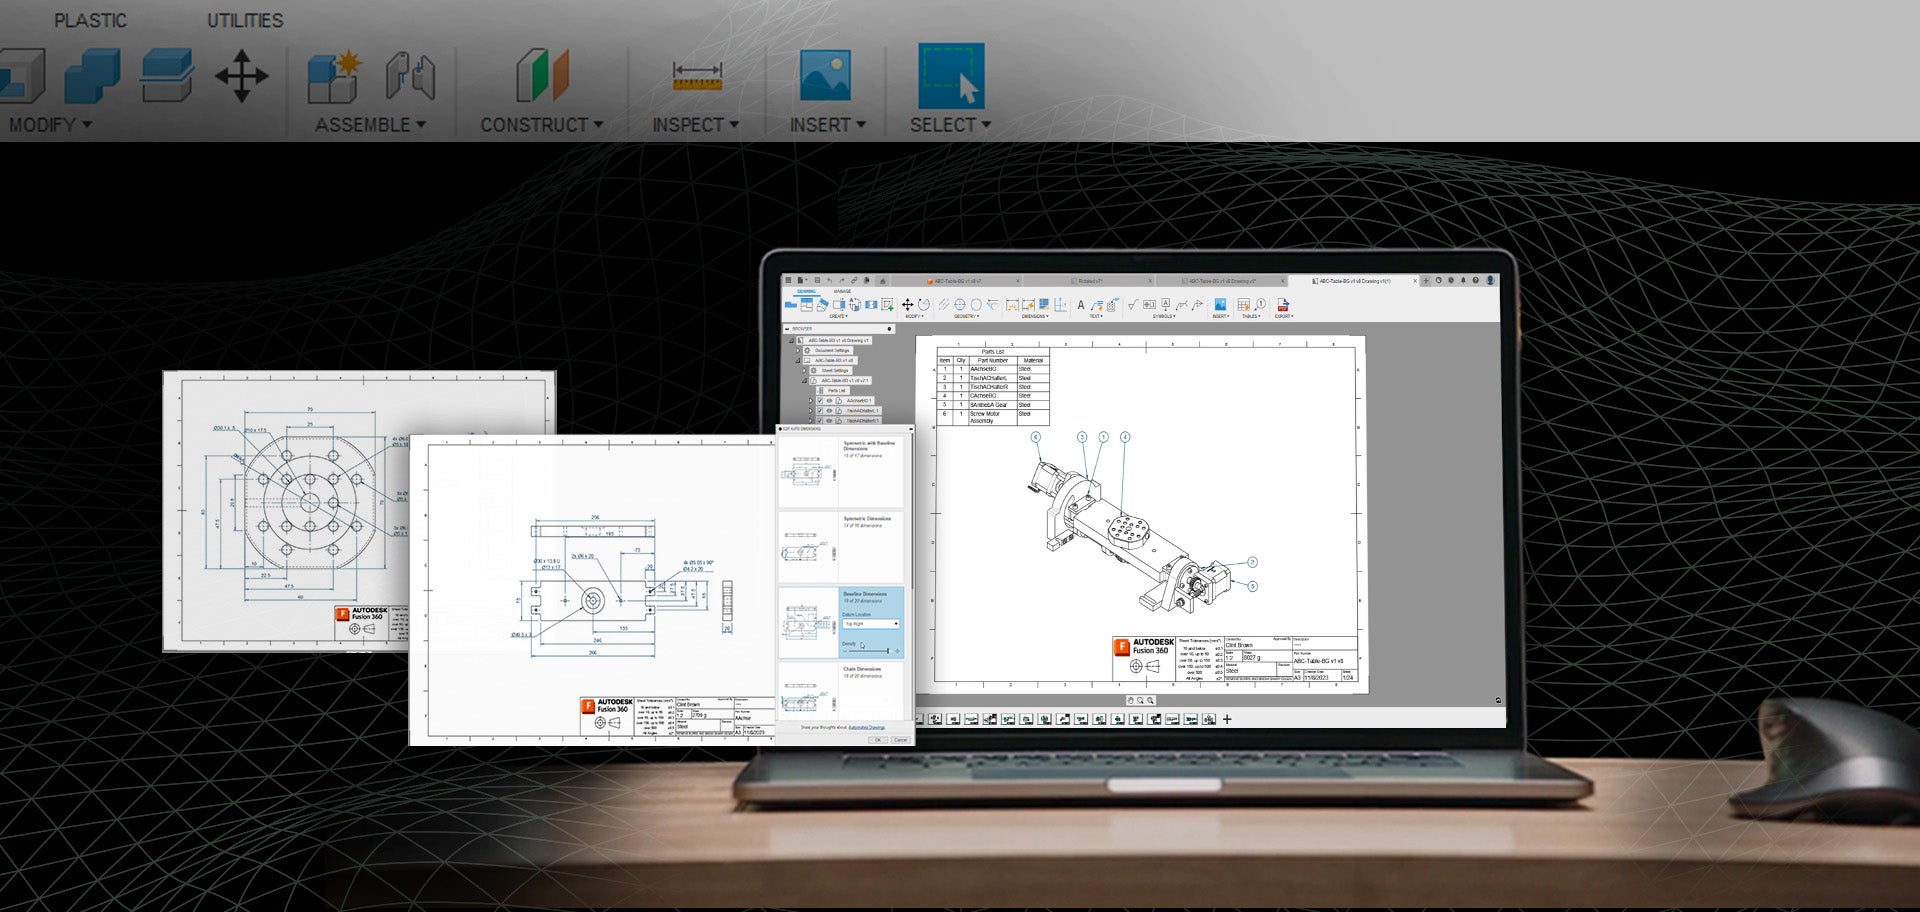 Drawing Automation in Fusion is a tool that automates the tedious steps of creating technical drawings to send to manufacturers.